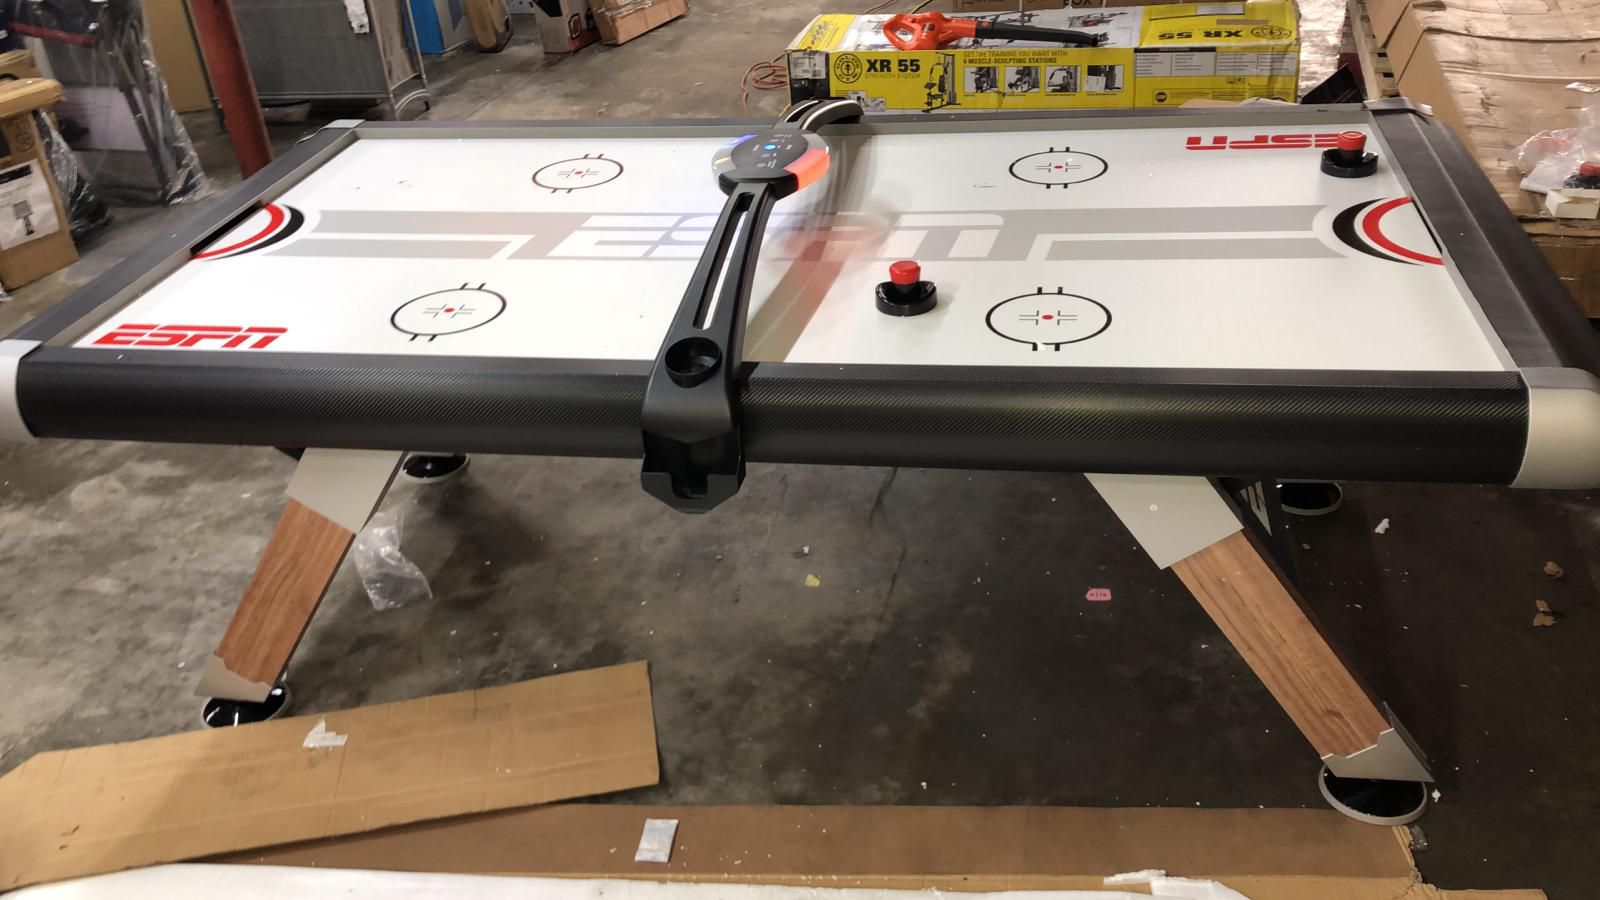 ESPN Belham Collection 8 Ft. Air Powered Hockey Table with Overhead Electronic Scorer and Table Cover, Black (LITTLE SHIPPING DAMAGE ON THE TOP)